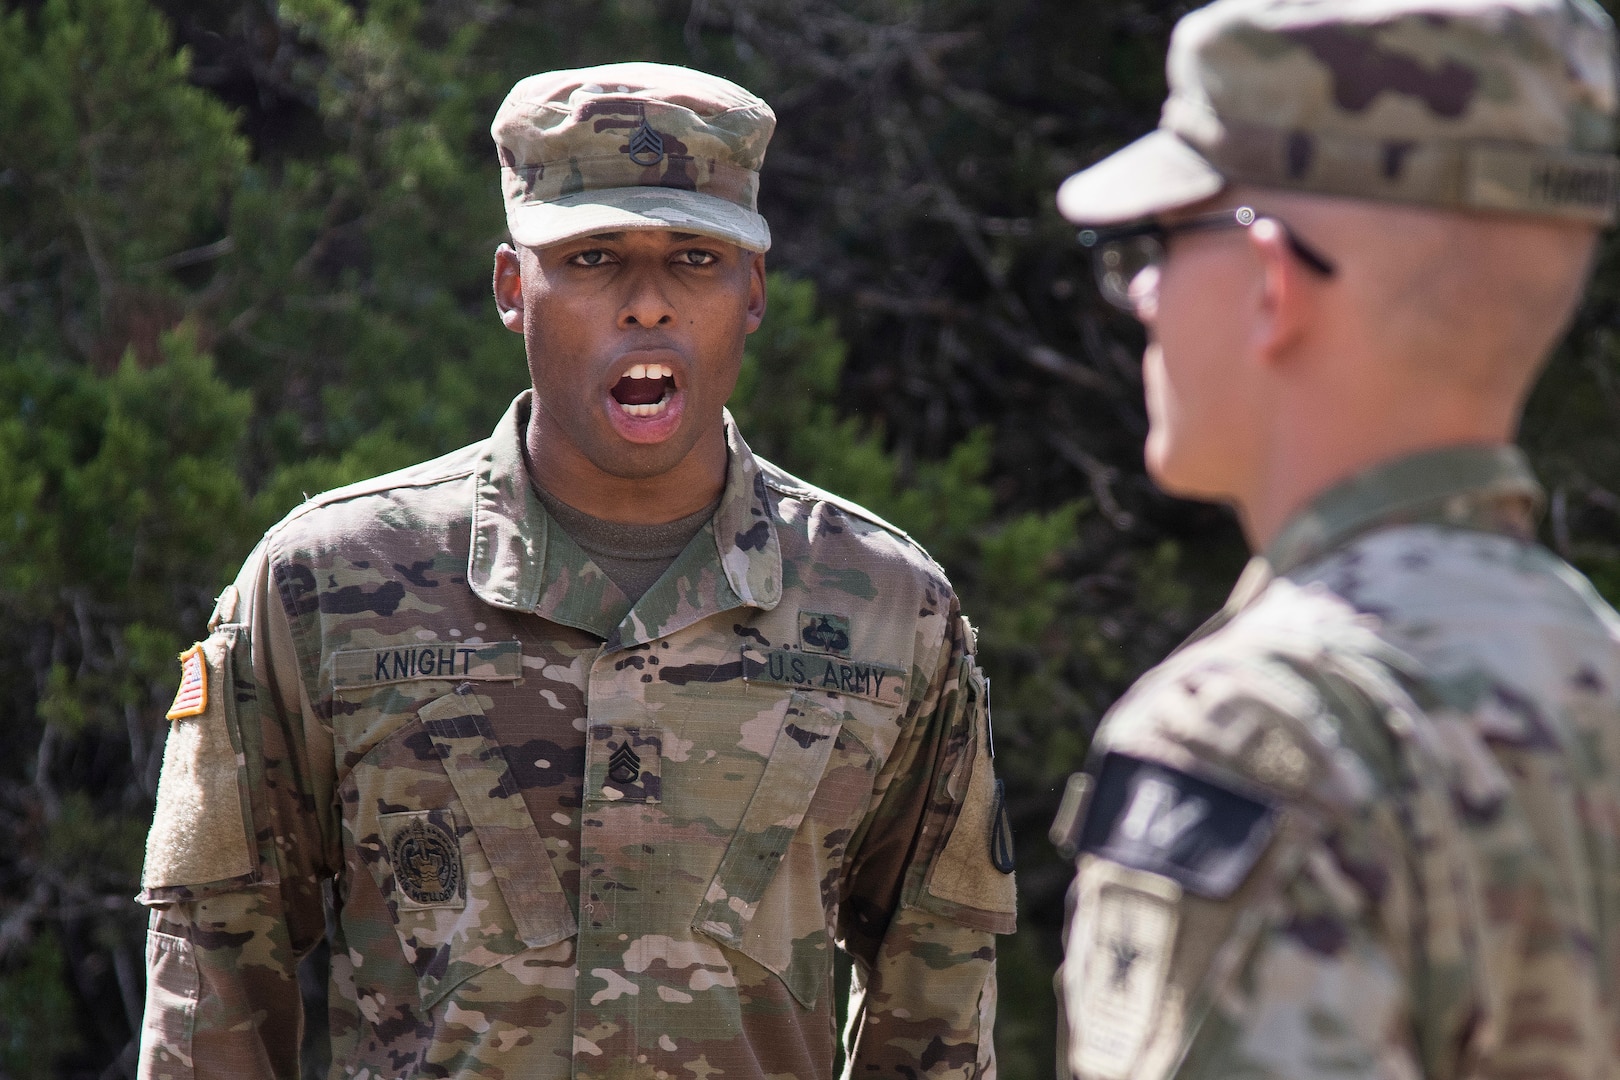 U.S. Army Staff Sgt. Earnest Knight II, U.S. Army Drill Sergeant Academy drill instructor, gives a soldier commands on the situational training exercise lanes during the Drill Sergeant of the Year Competition August 19, 2019, at Joint Base San Antonio-Camp Bullis.